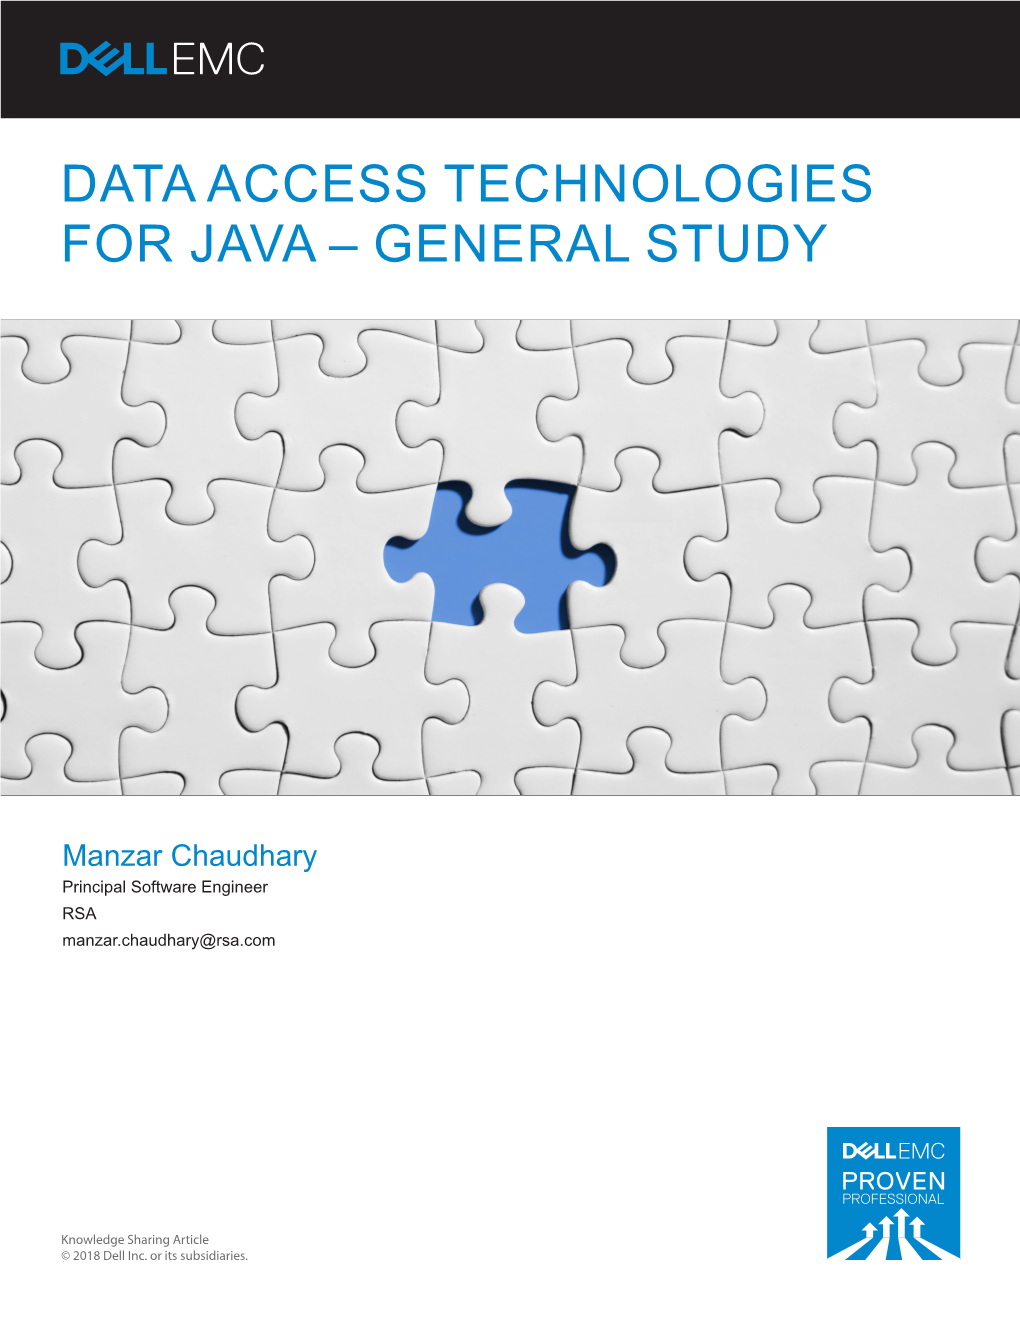 Data Access Technologies for Java – General Study